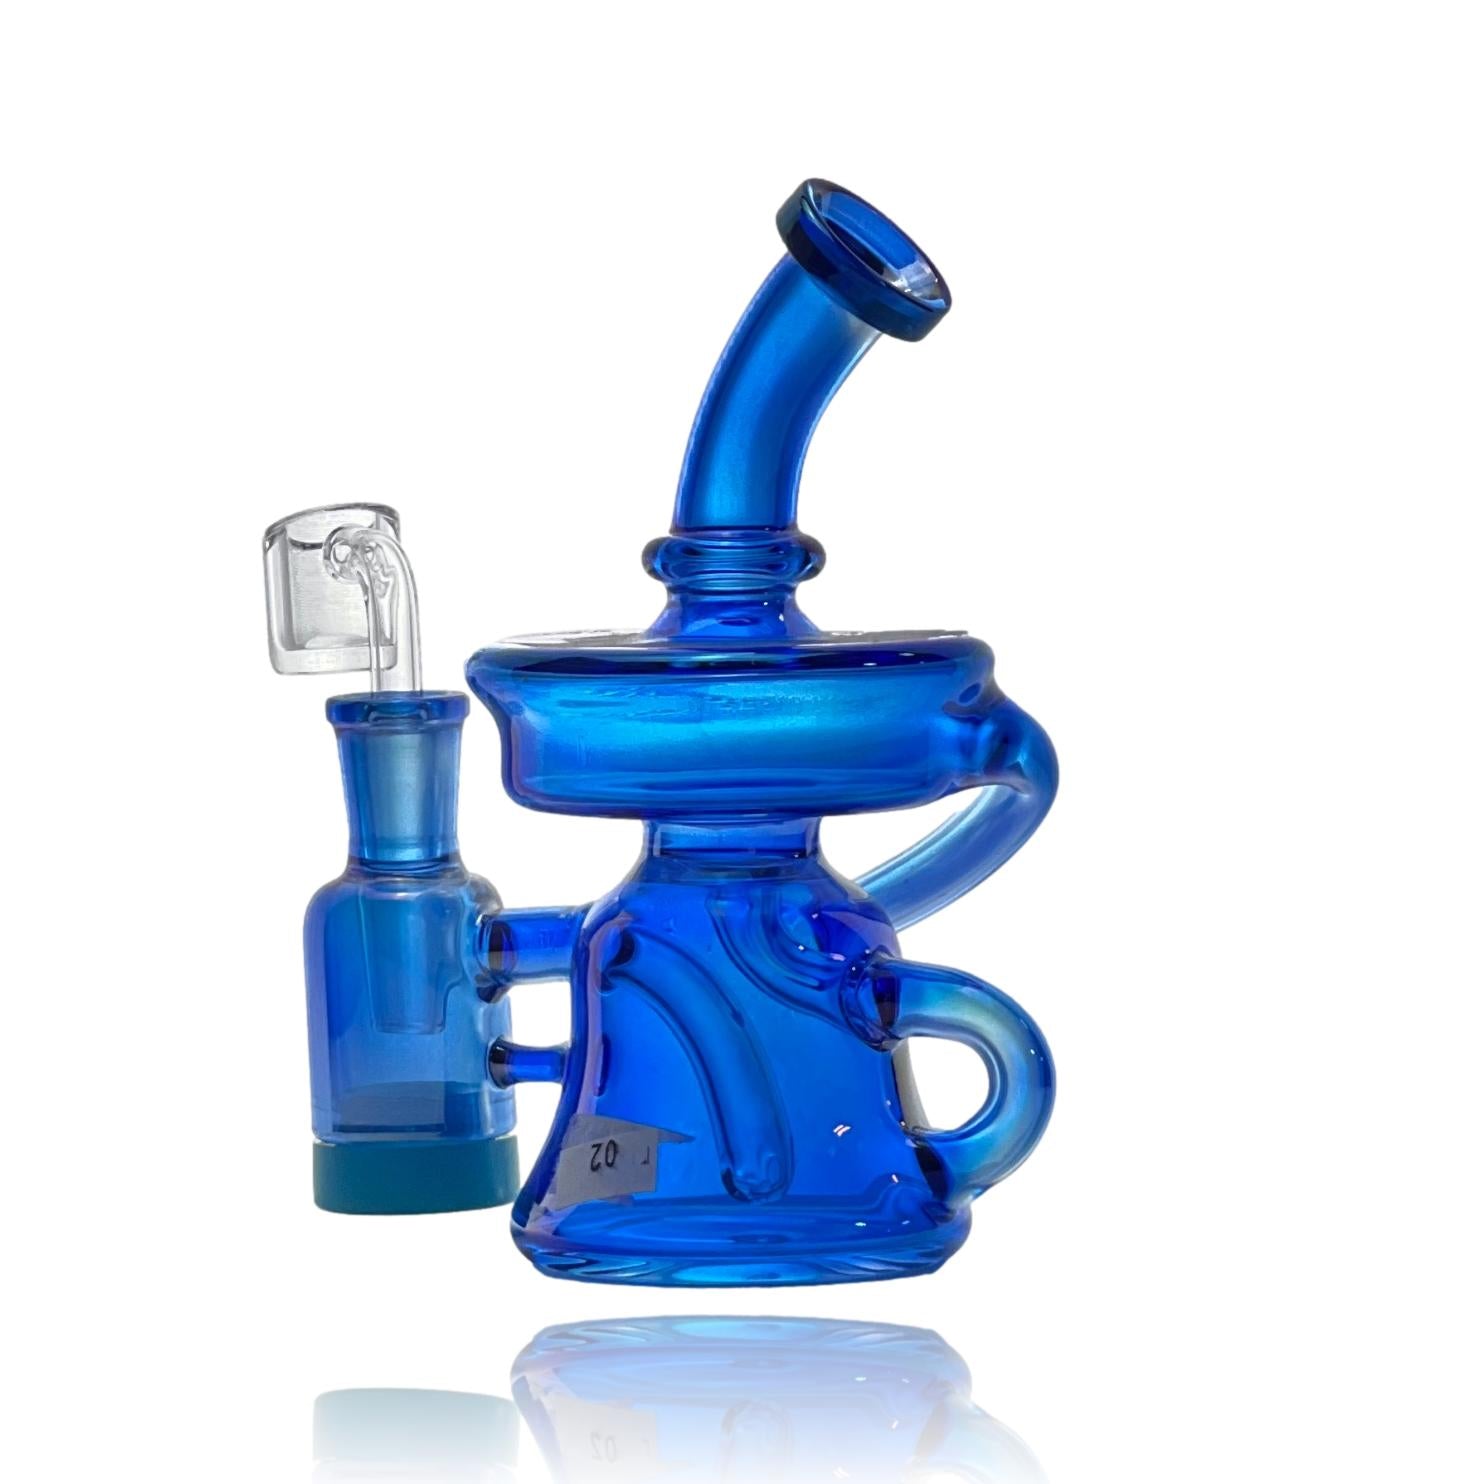 Crystal Glass combined the reclaim catcher, which would normally be a separate attachment to help keep the rig clean while saving left over resin, and a beautiful recycler. The function is amazing and the flavor is unmatched. Enjoy the iridescent colors while vaping your favorite concentrate and watch how quickly this becomes your favorite piece.